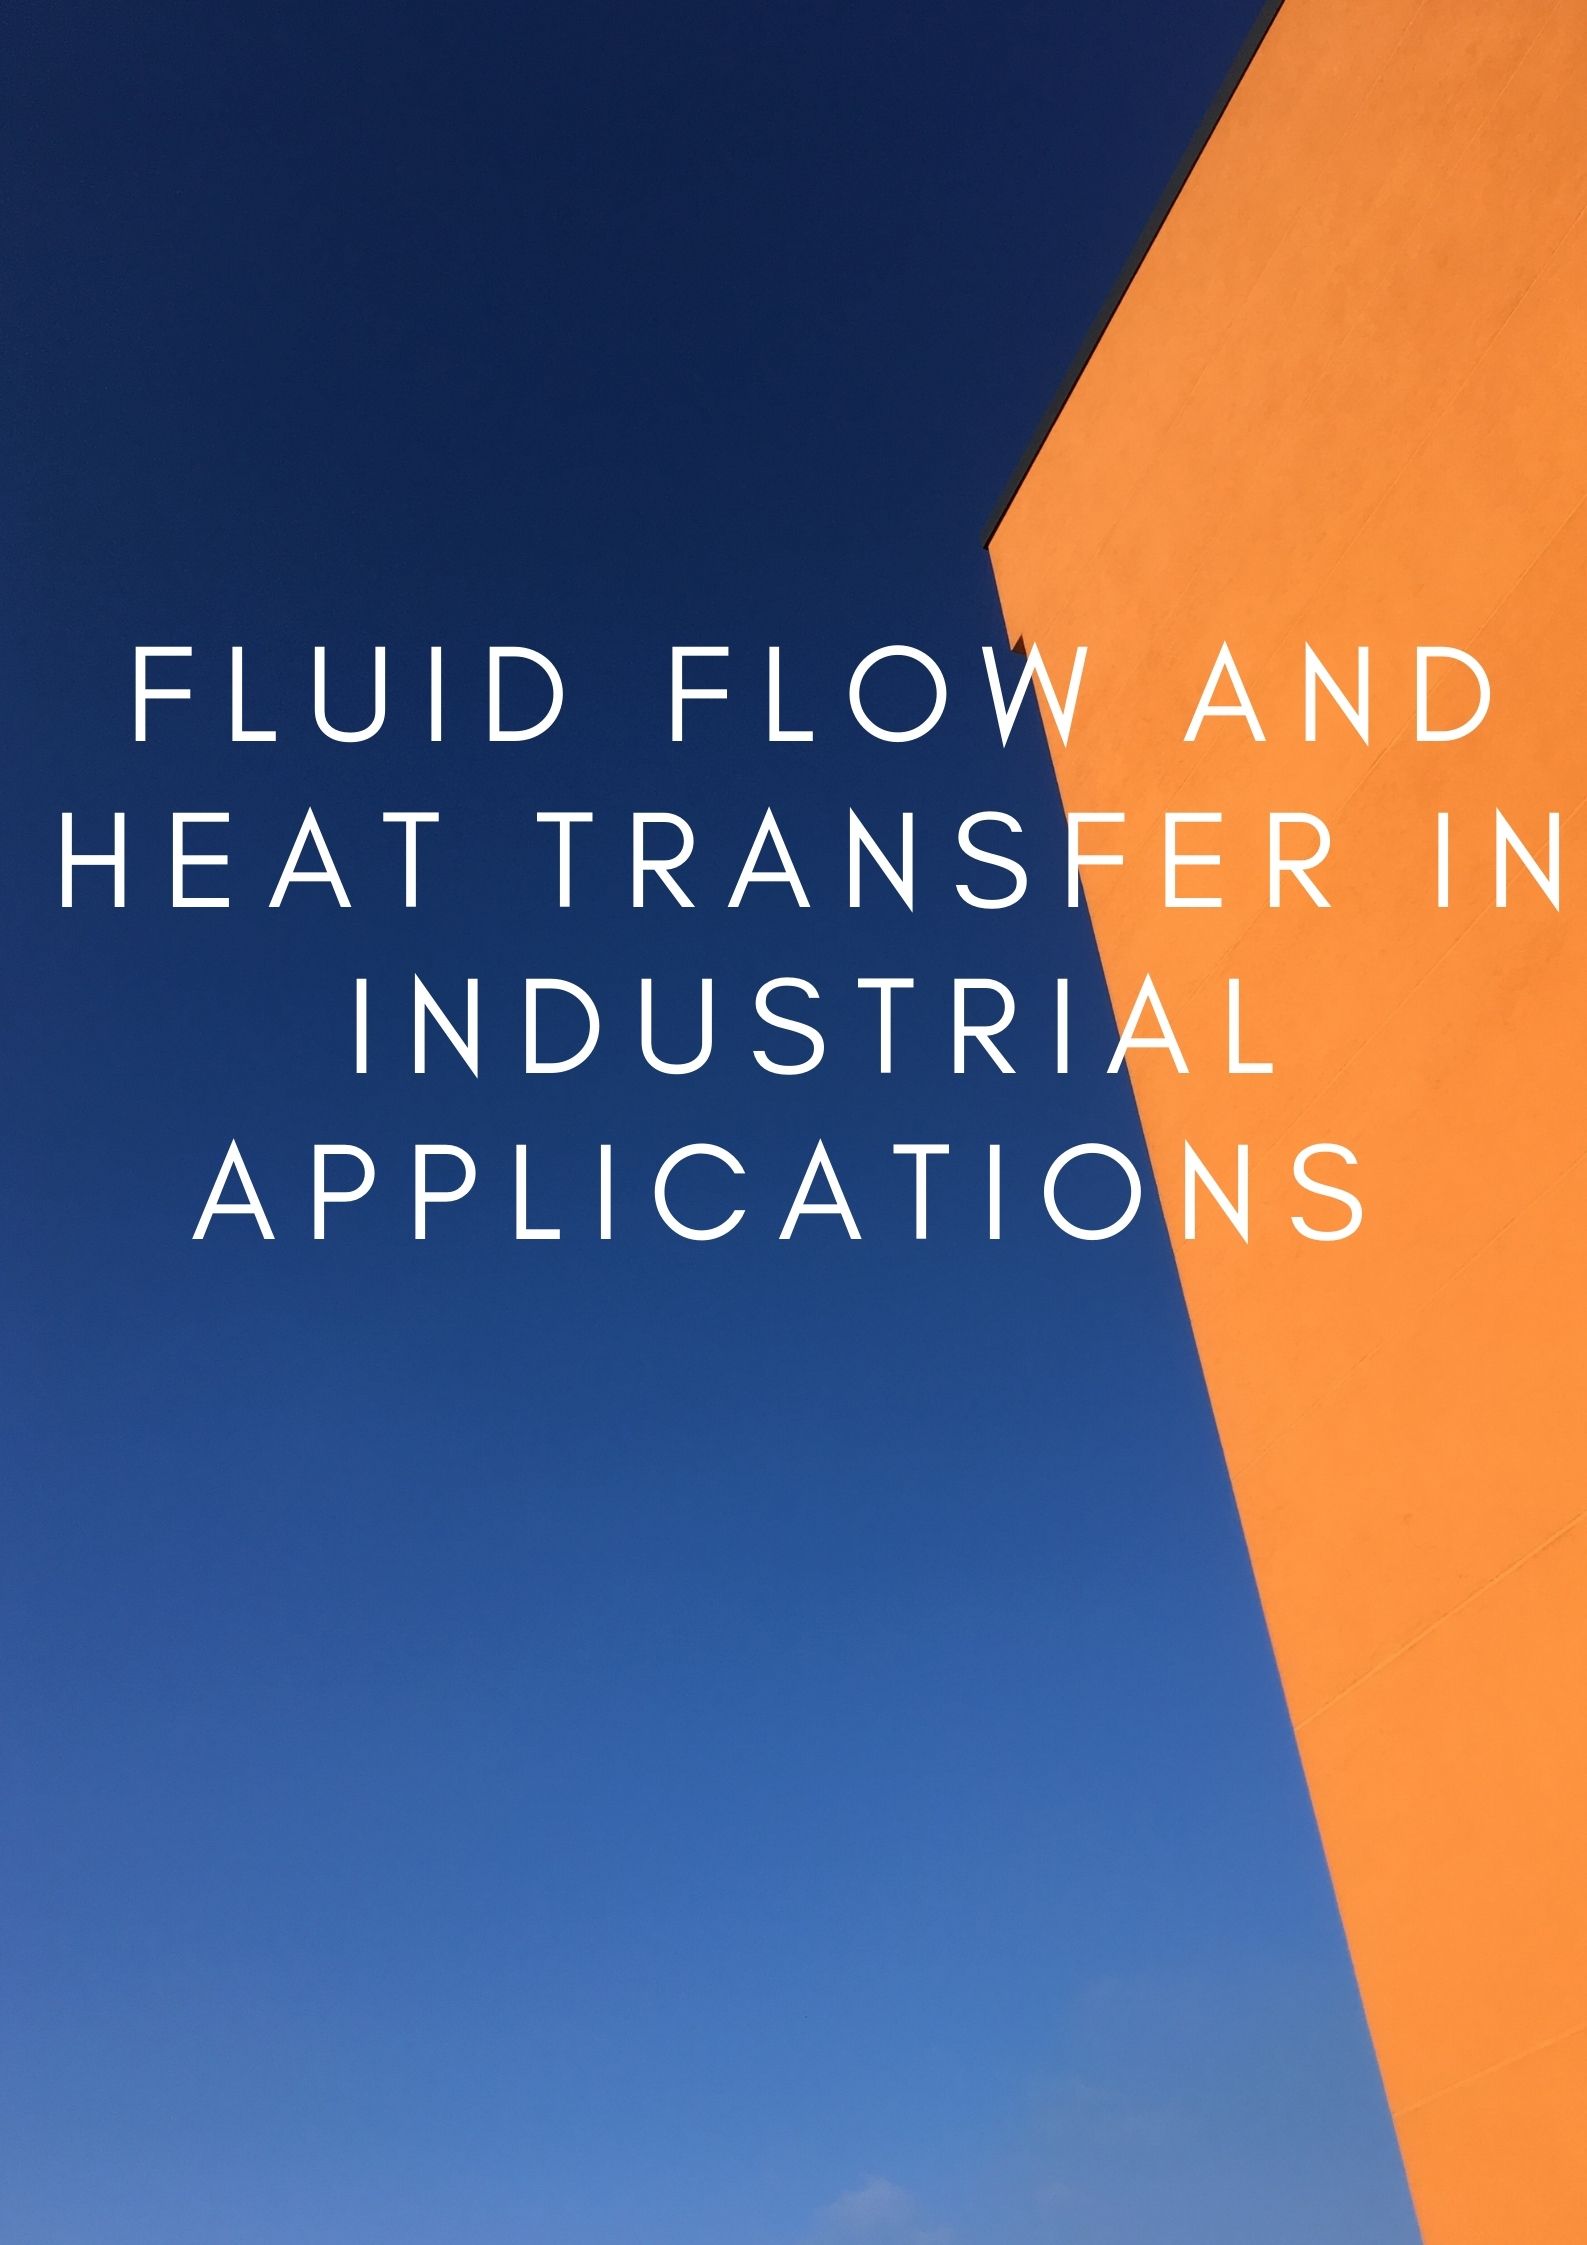 Fluid Flow and Heat Transfer in Industrial Applications